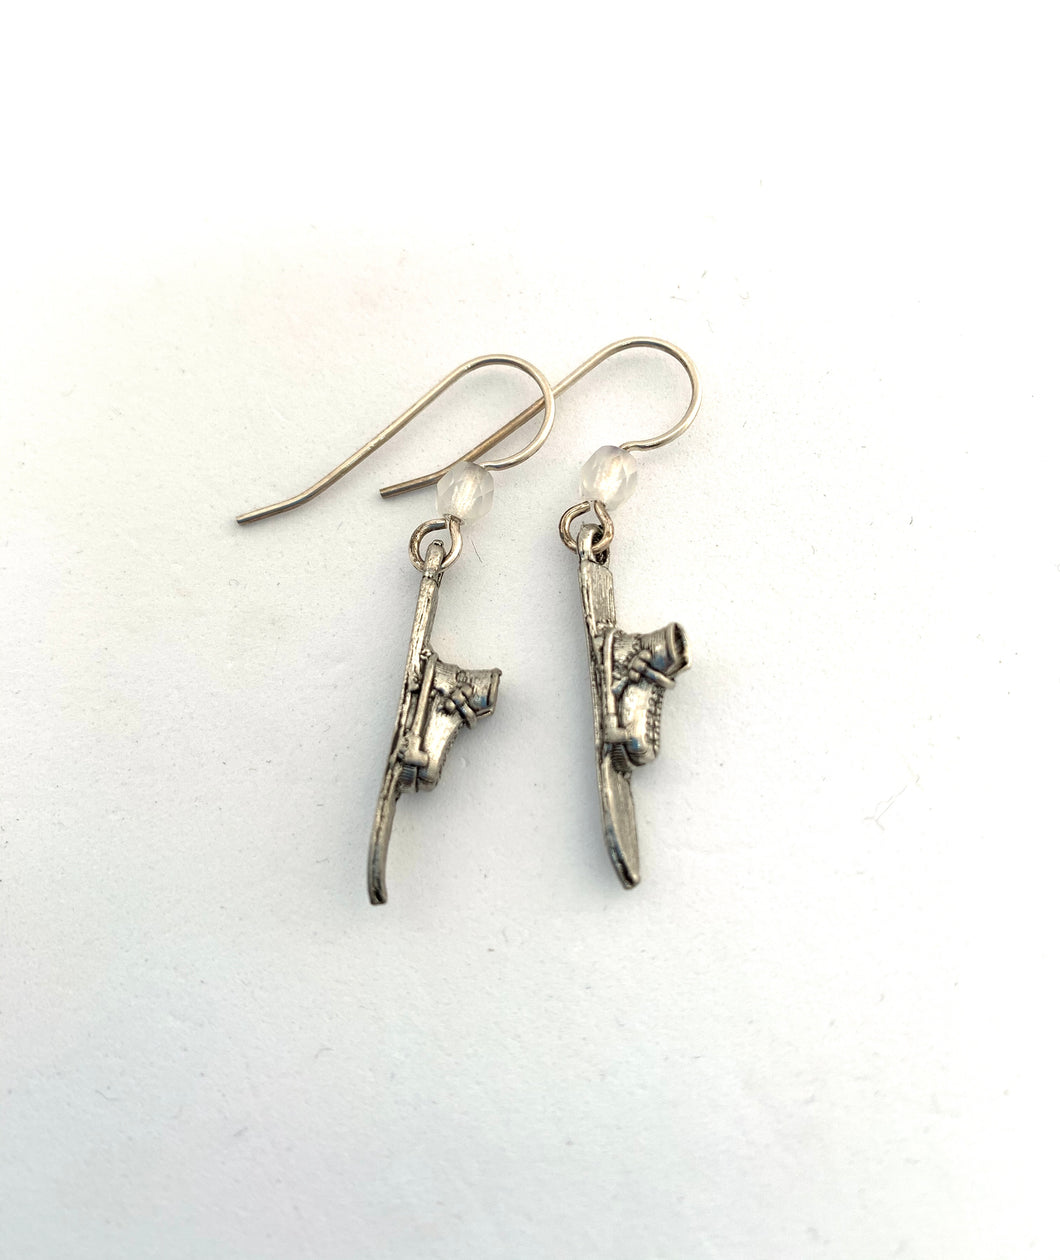 Ski and Boot Earrings - Lively Accents